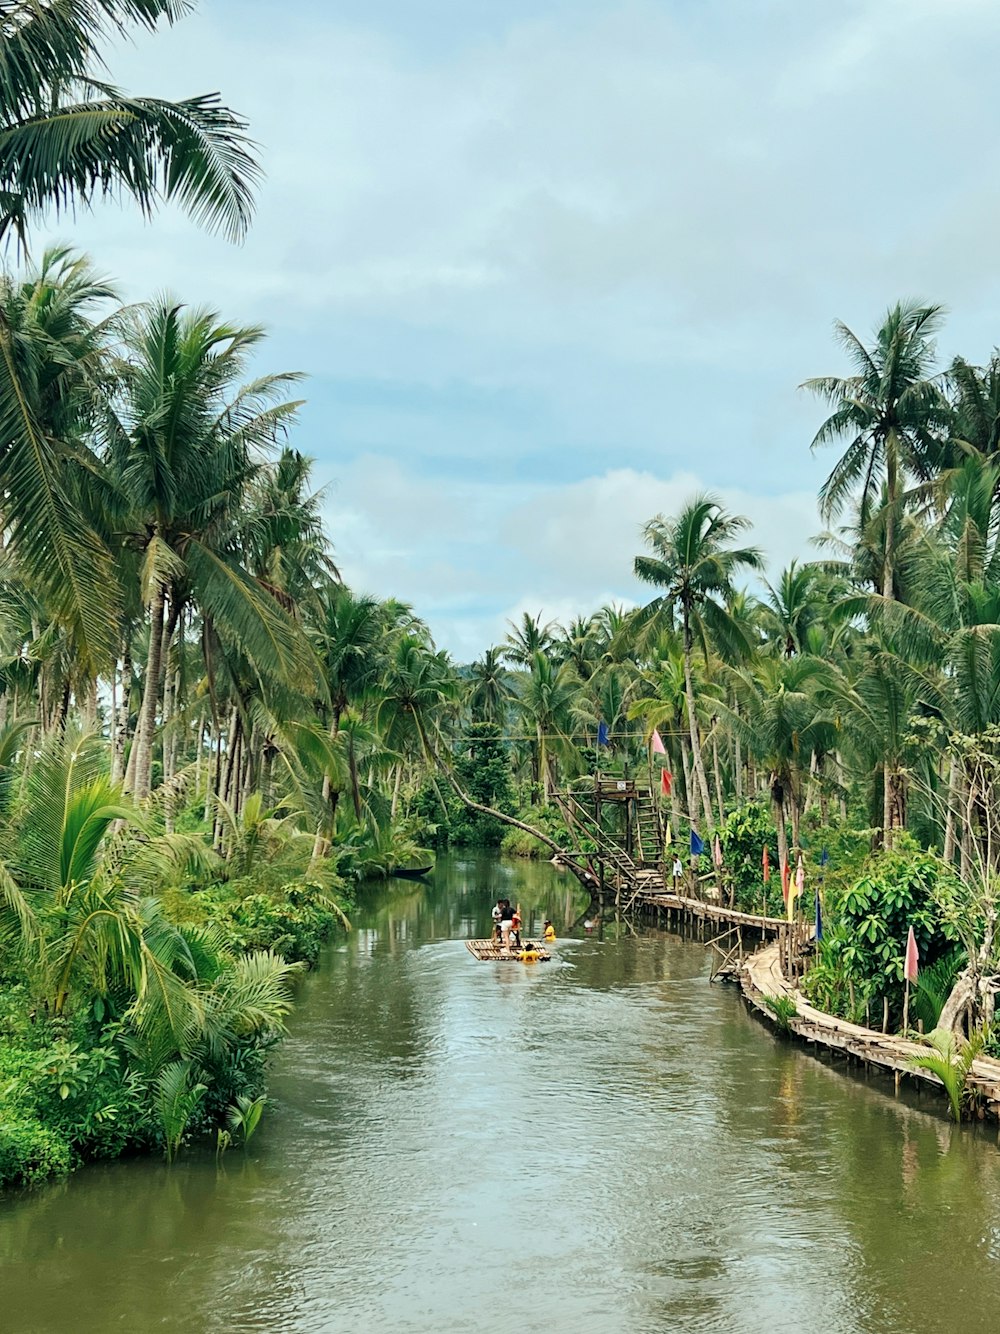 a couple people in a boat on a river surrounded by palm trees